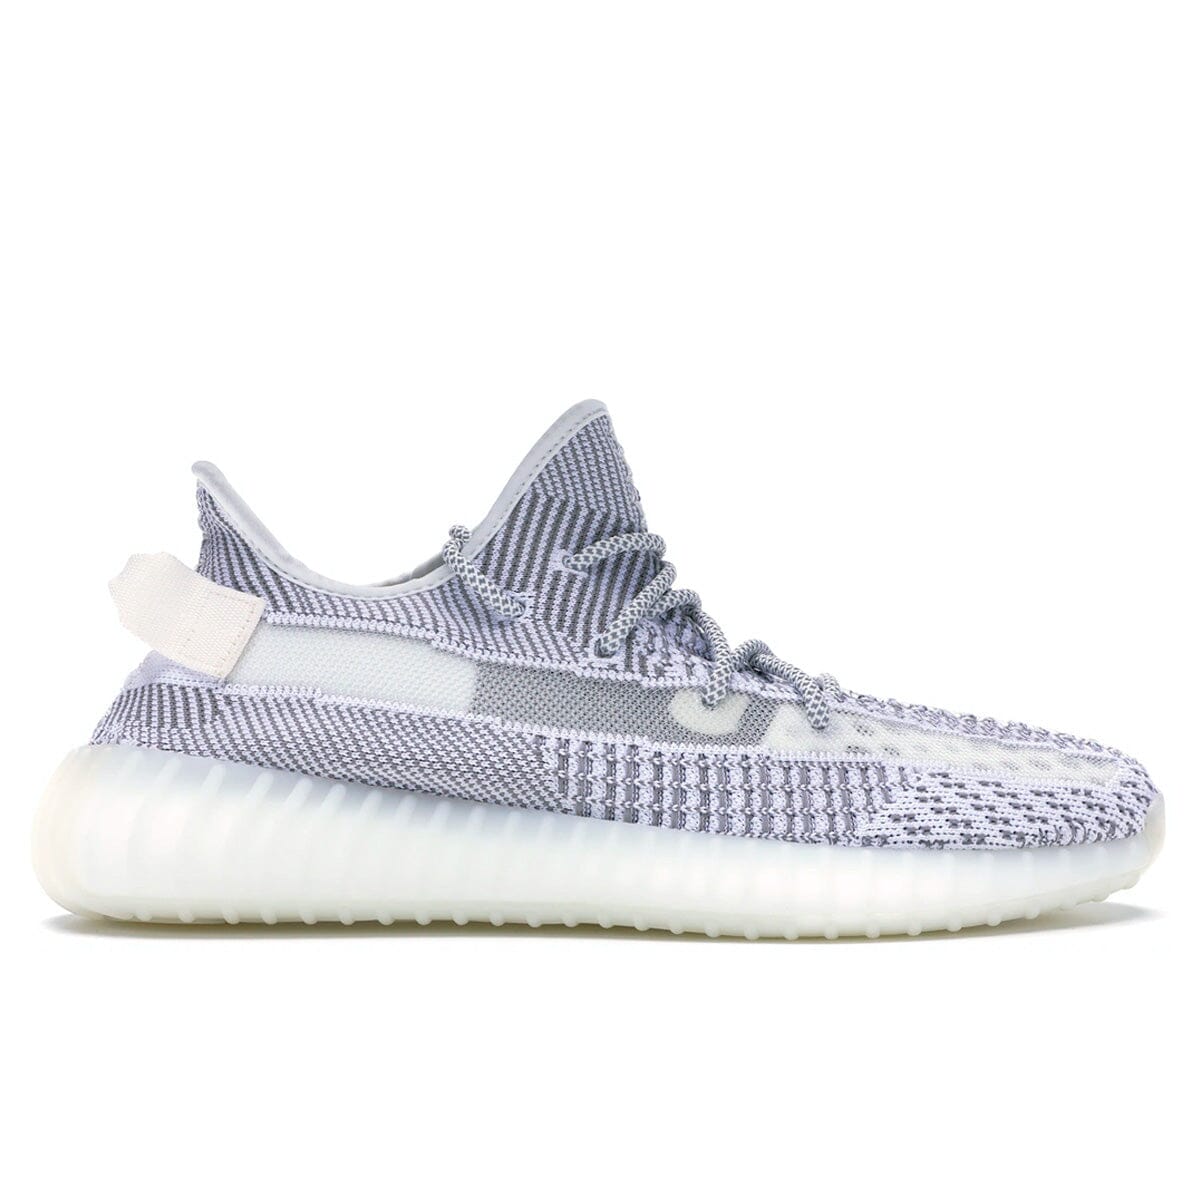 Adidas Yeezy Boost 350 V2 Static (Non-Reflective) Yeezy Blizz Sneakers 